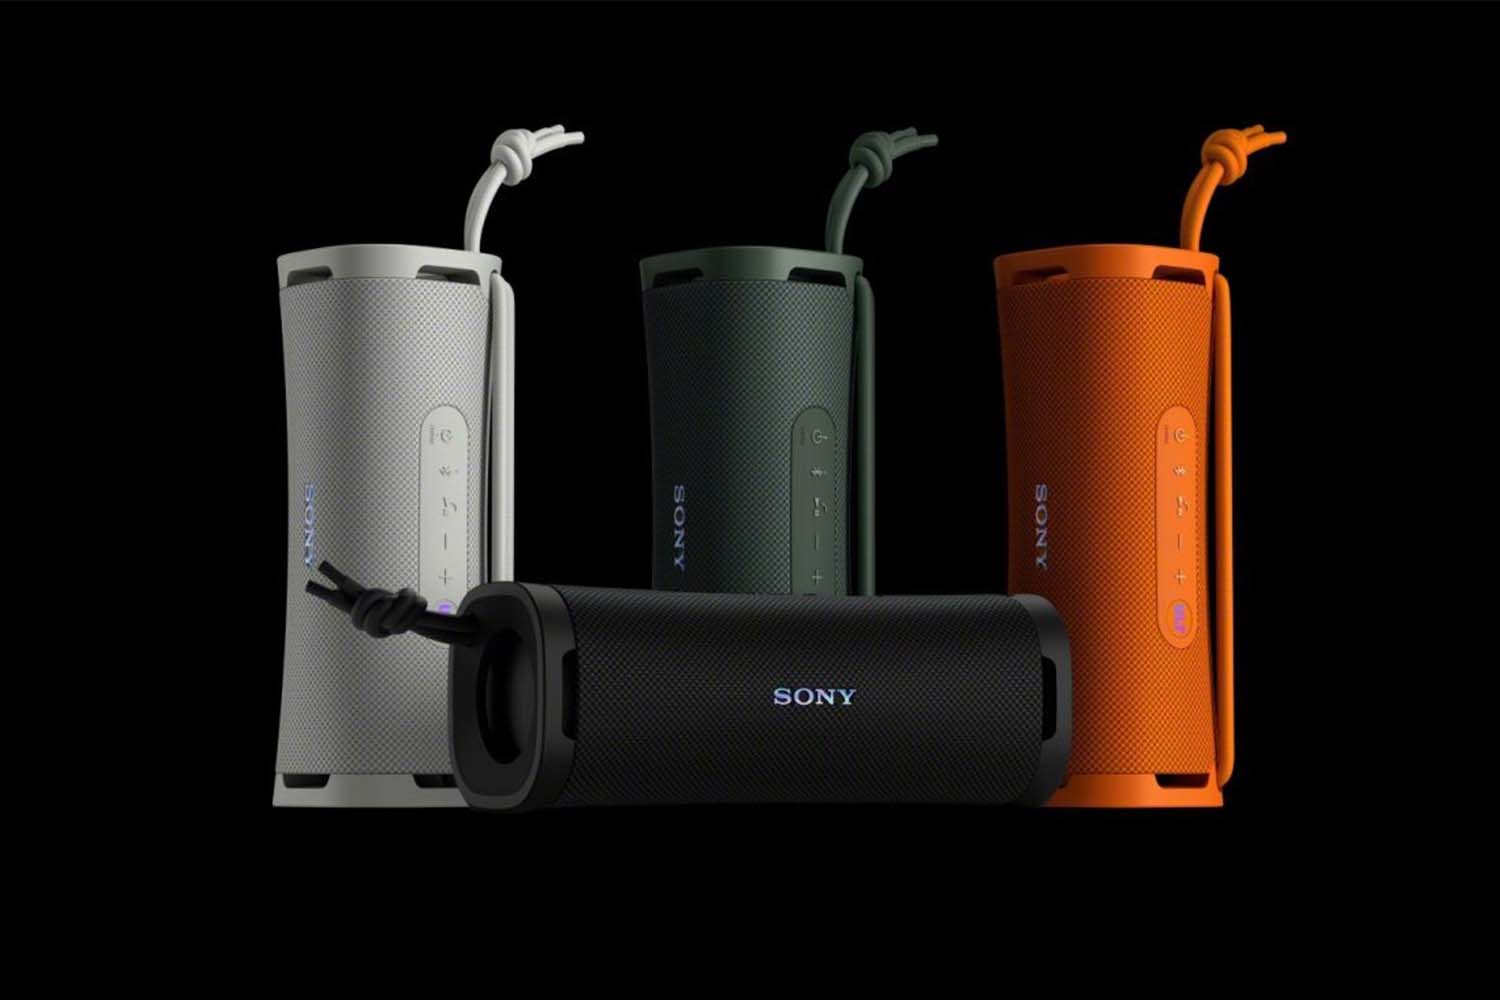 Four styles of the Sony ULT FIELD 1 portable speaker